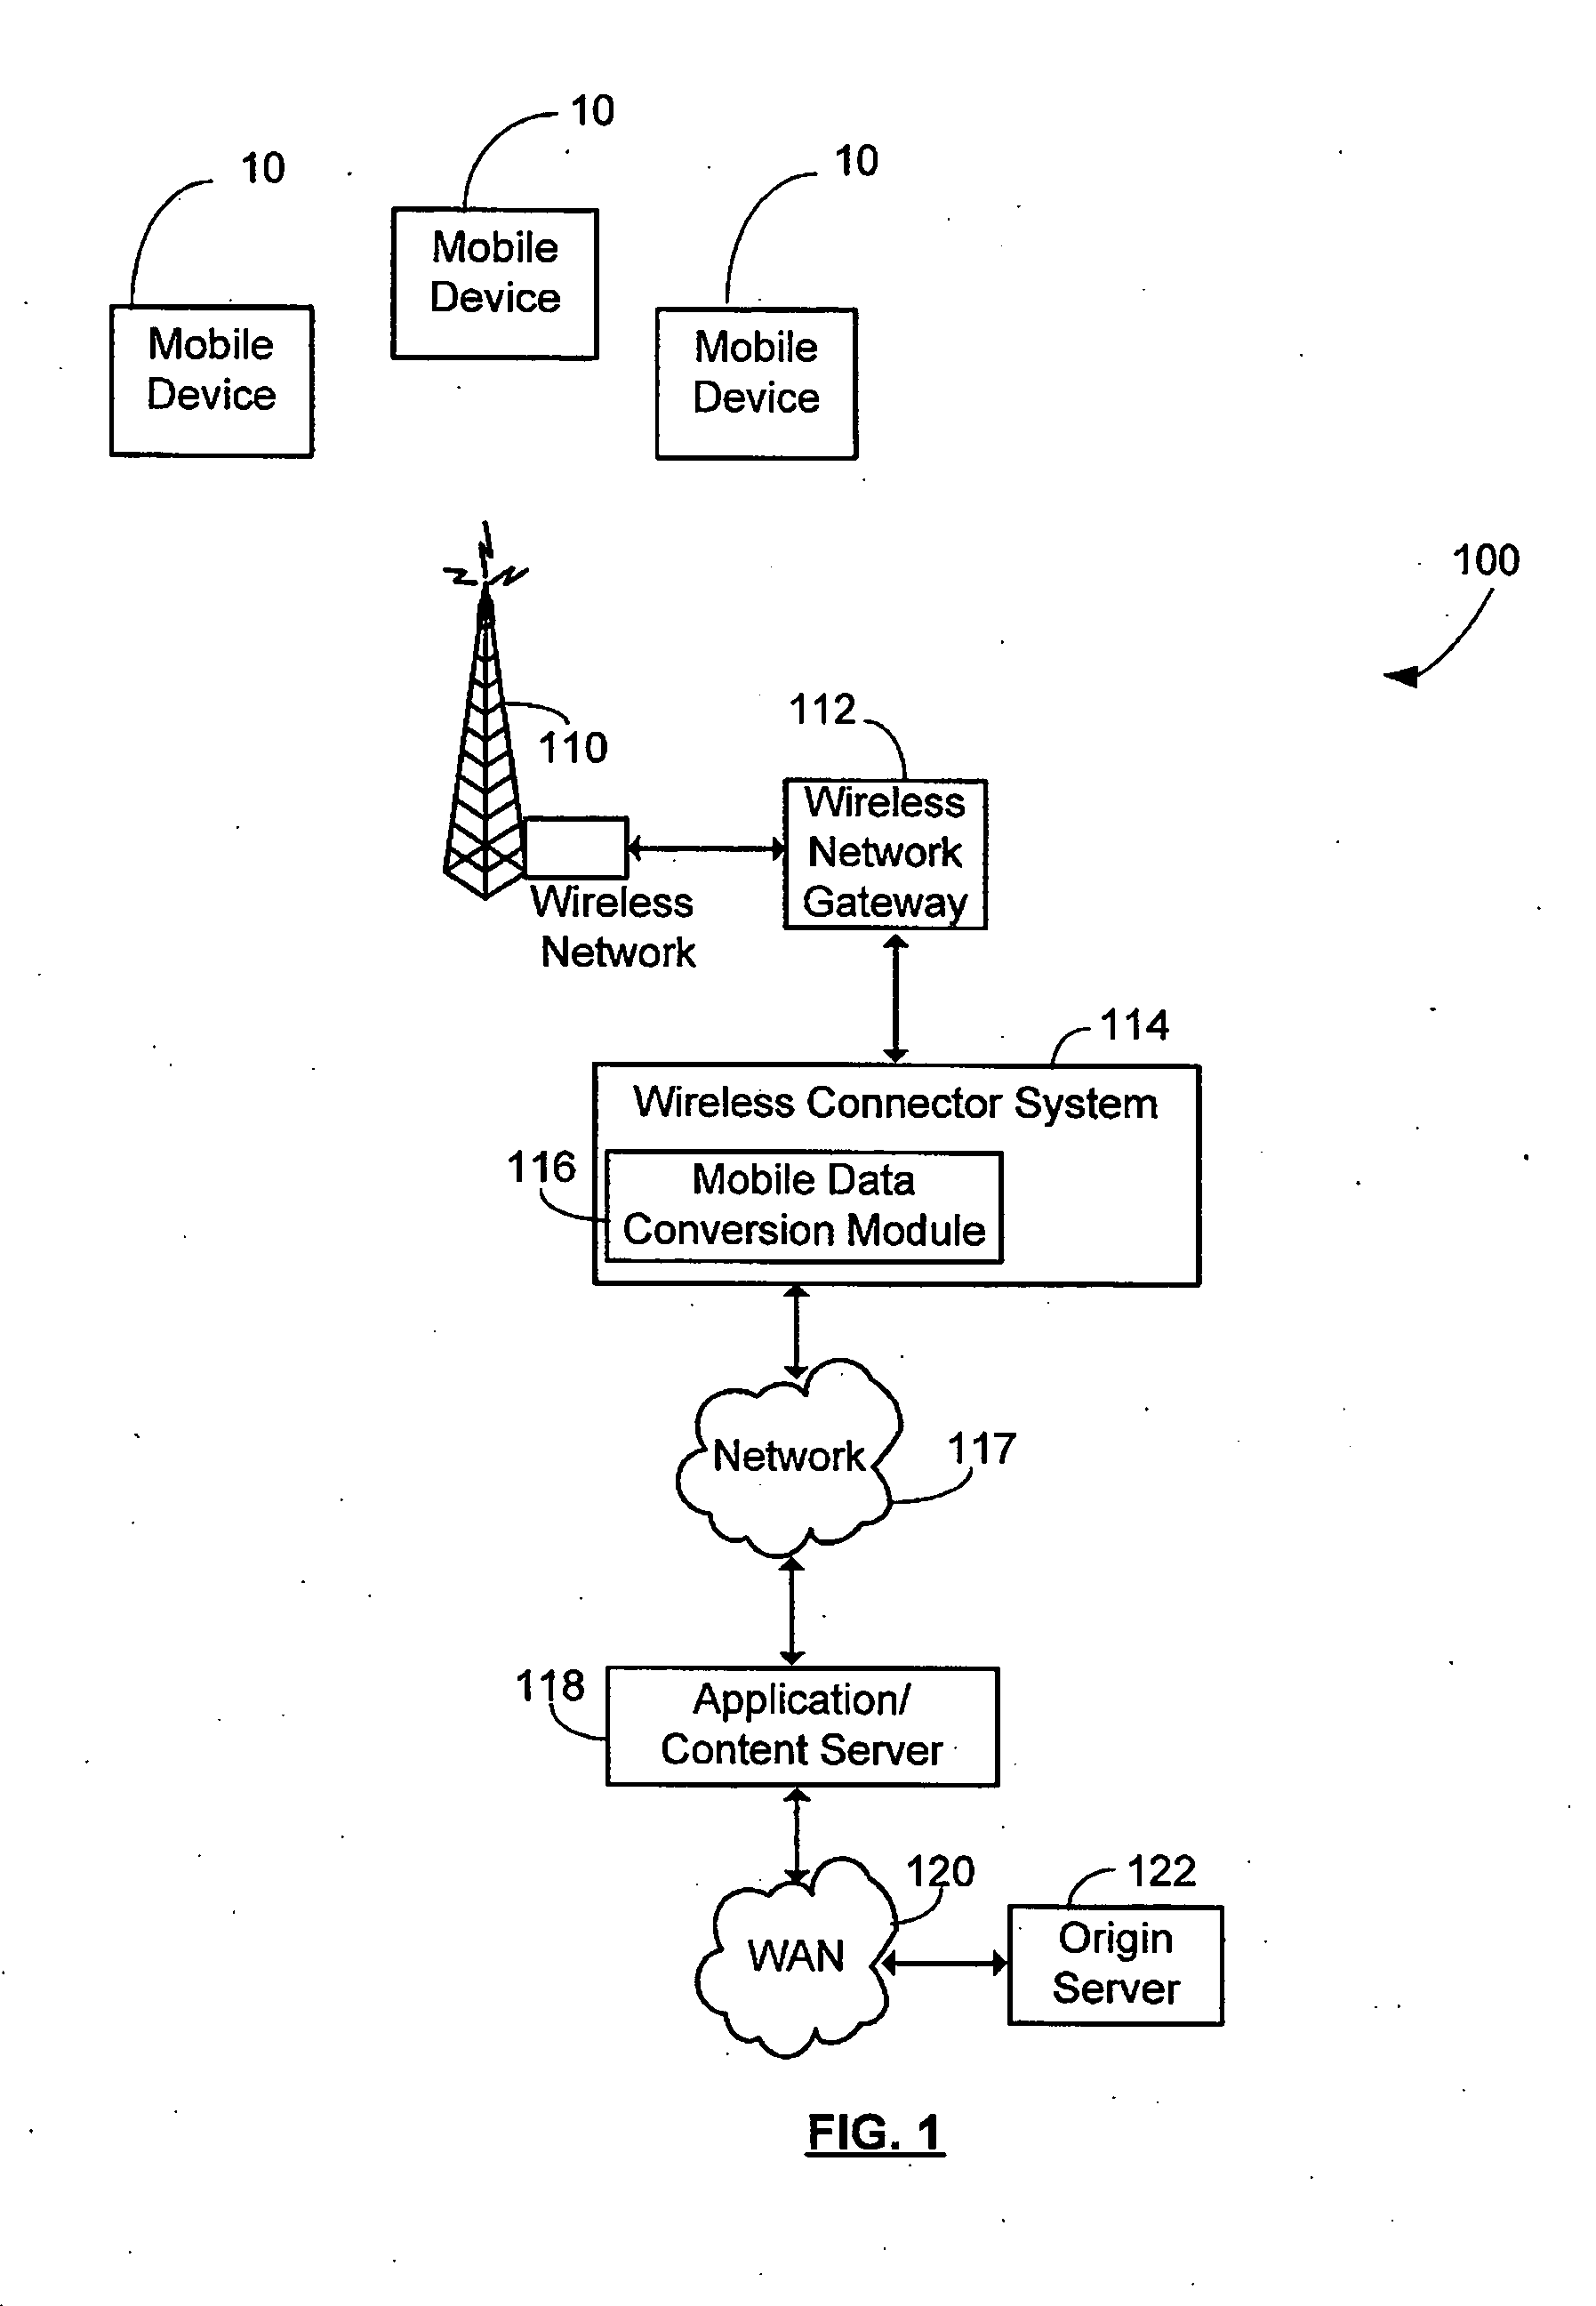 Image stitching for mobile electronic devices